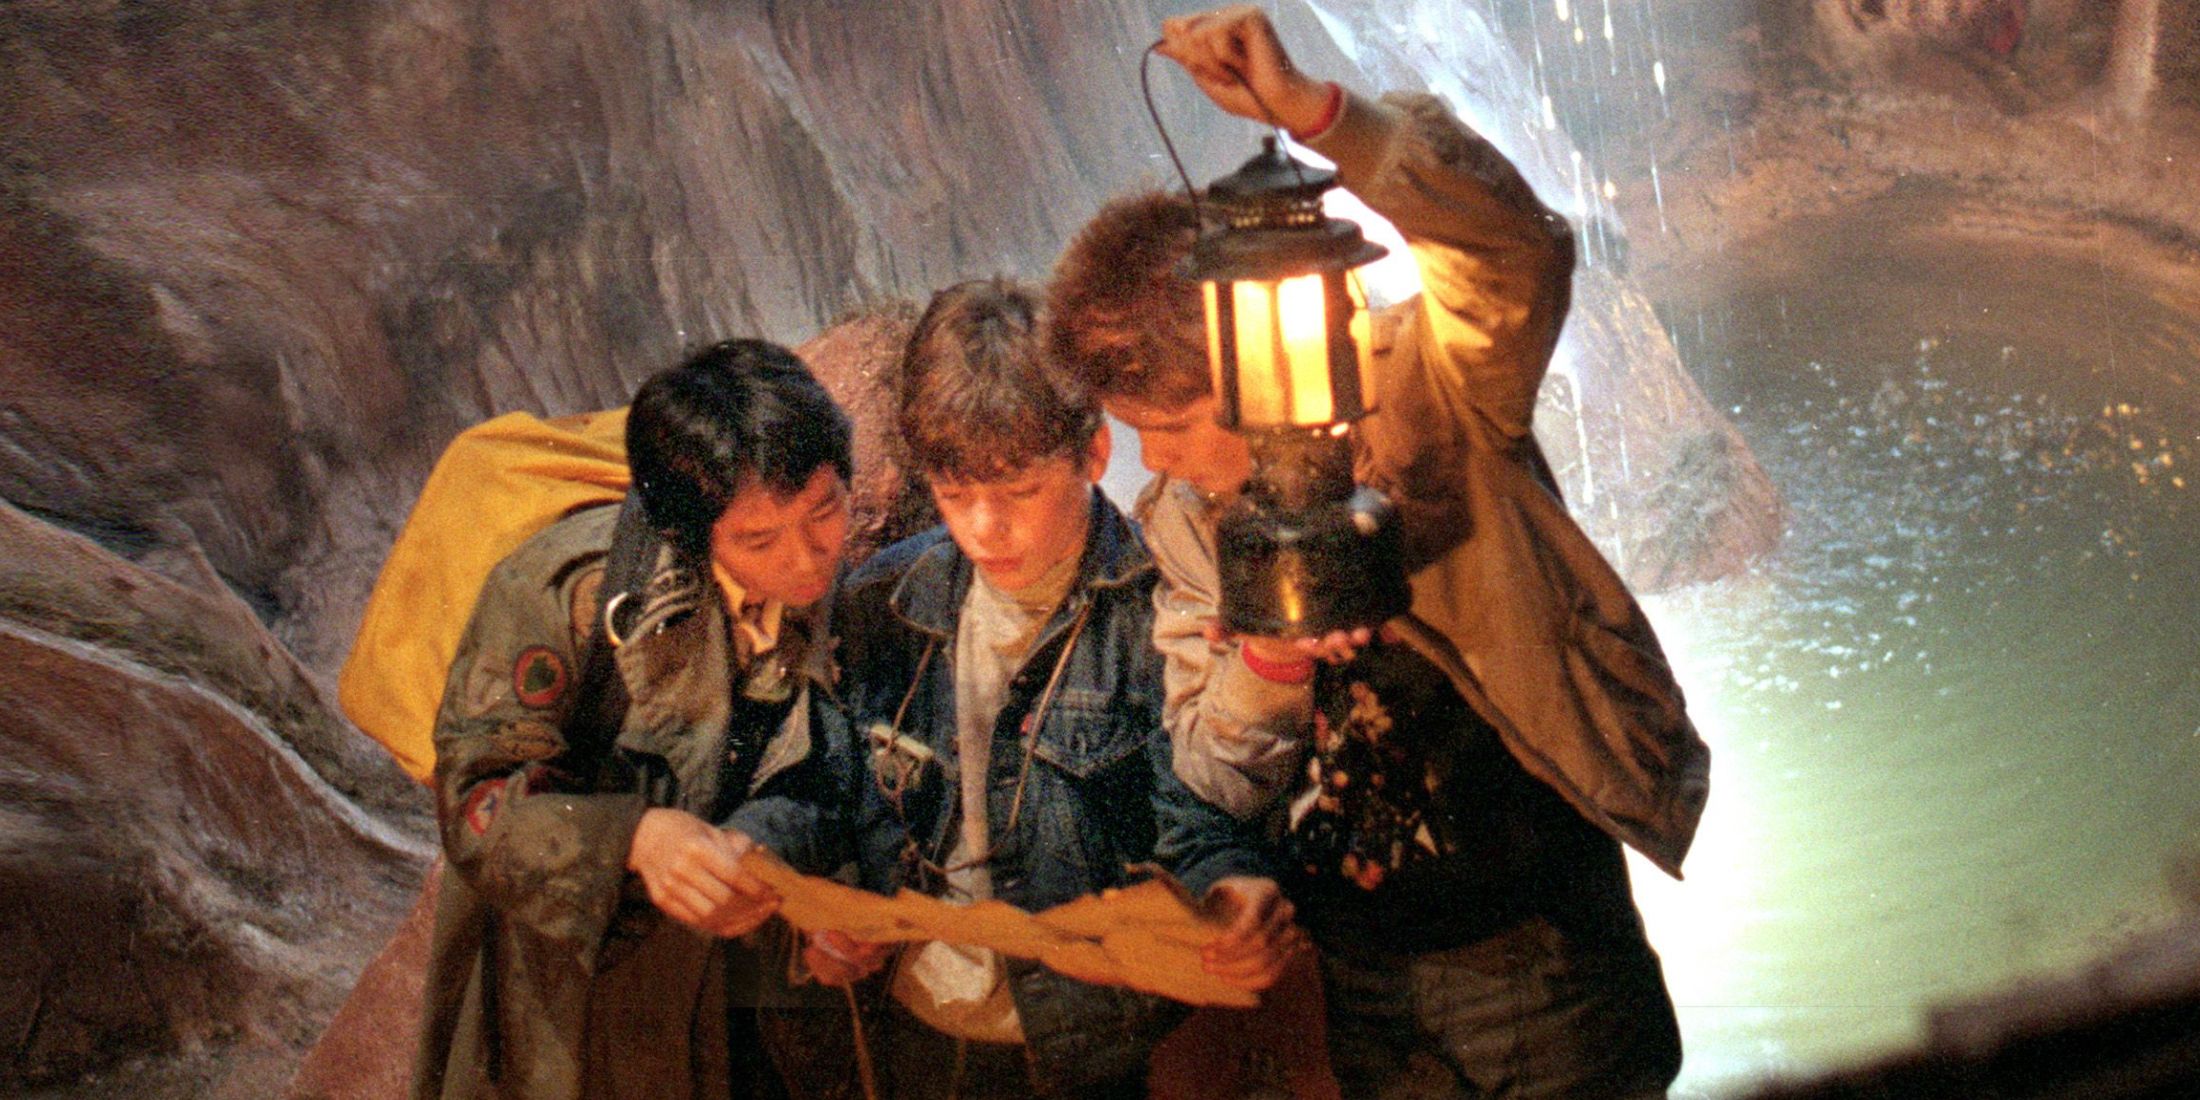 Data, Mikey, and Mouth looking at a map in a cavern in The Goonies